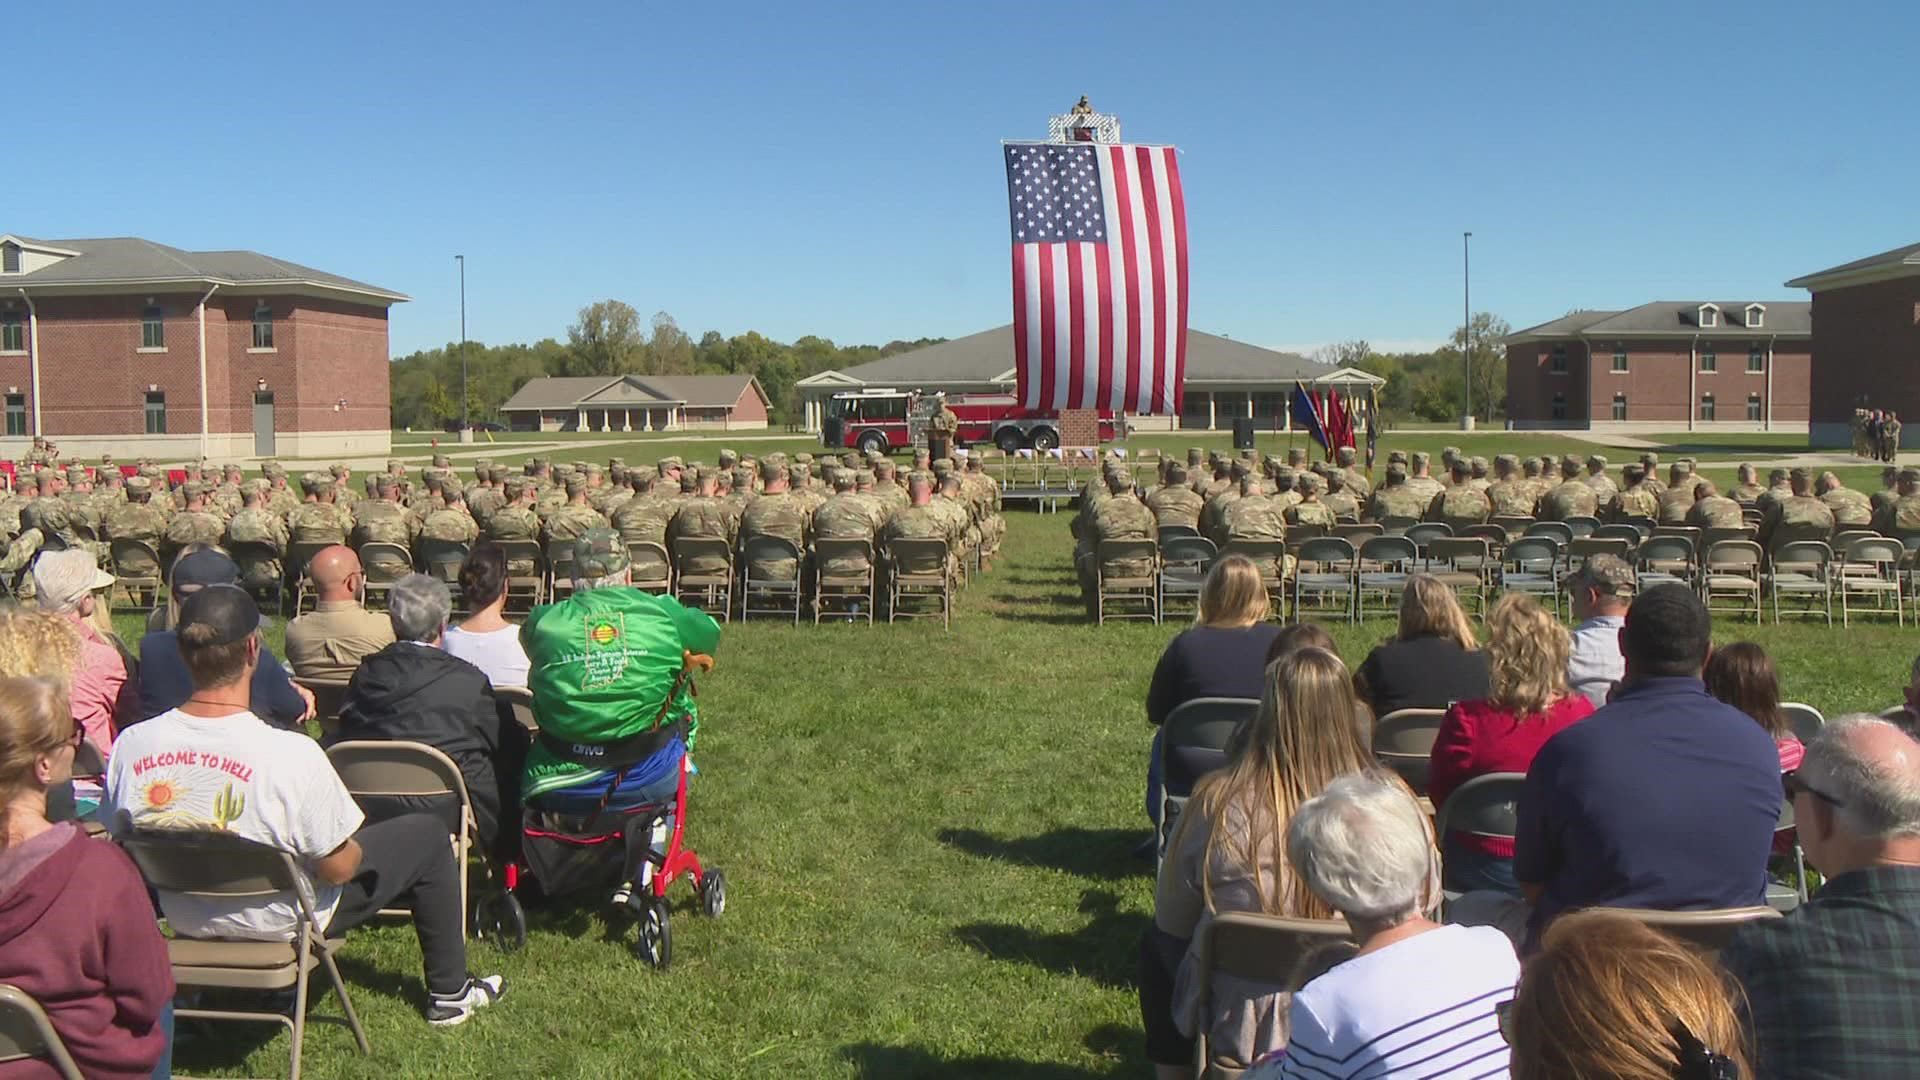 Approximately 300 Indiana national guardsmen left Camp Atterbury last week. They will be deployed for around 9 months.